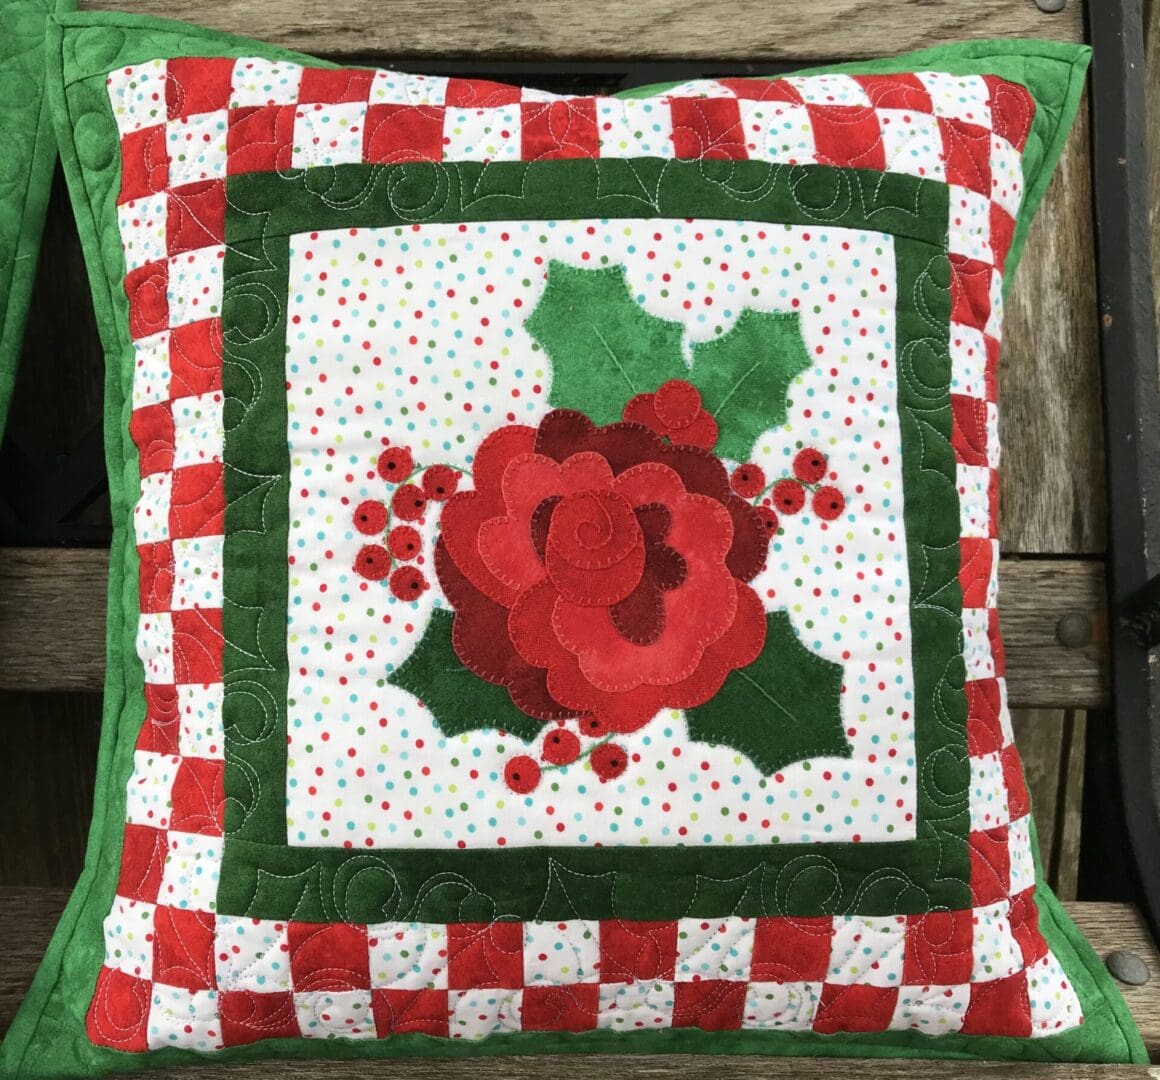 A red and green pillow with a flower on it.